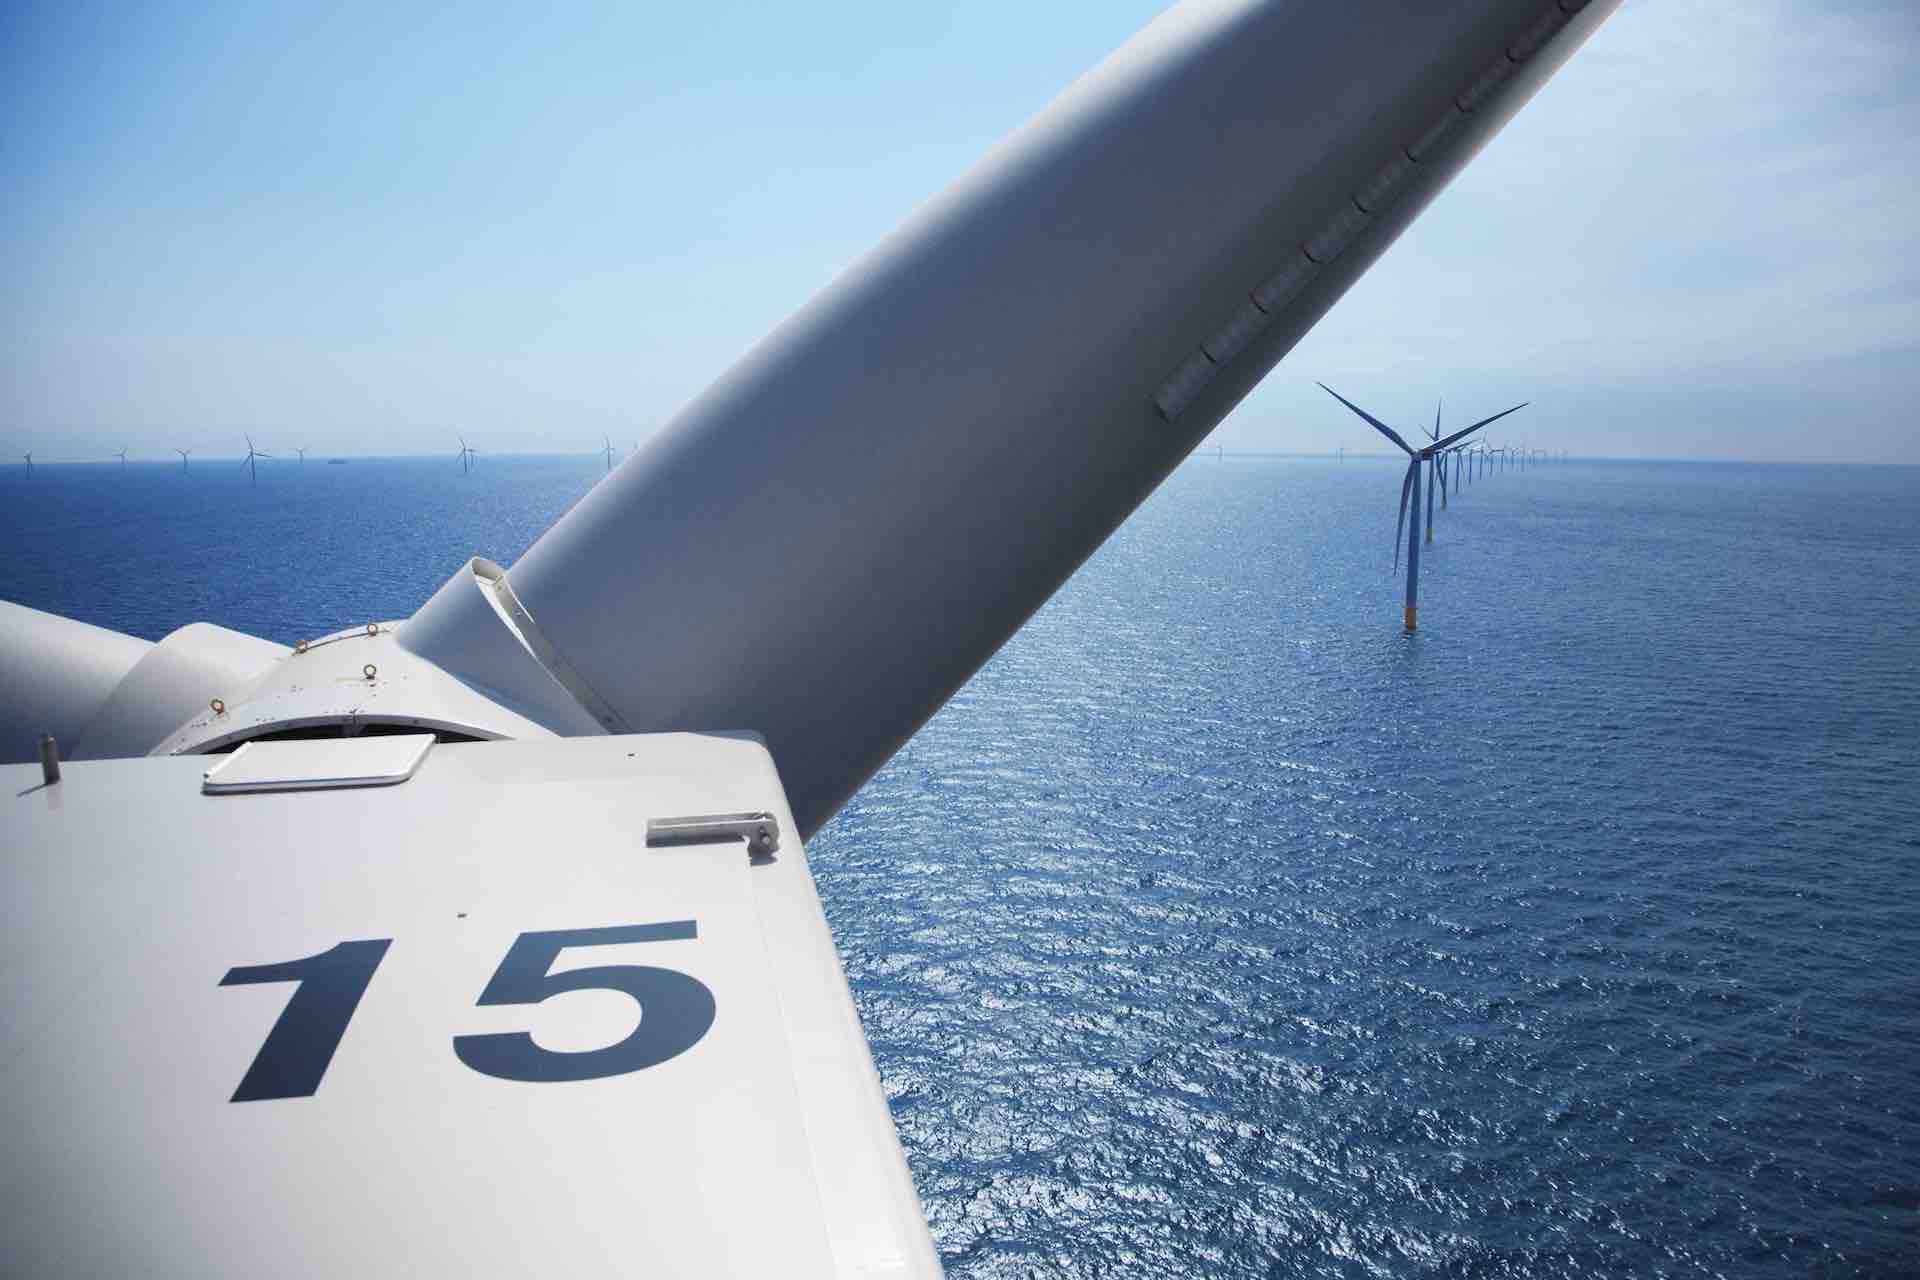 PGE and Ørsted have closed the joint venture agreement for Polish offshore wind projects - MarinePoland.com